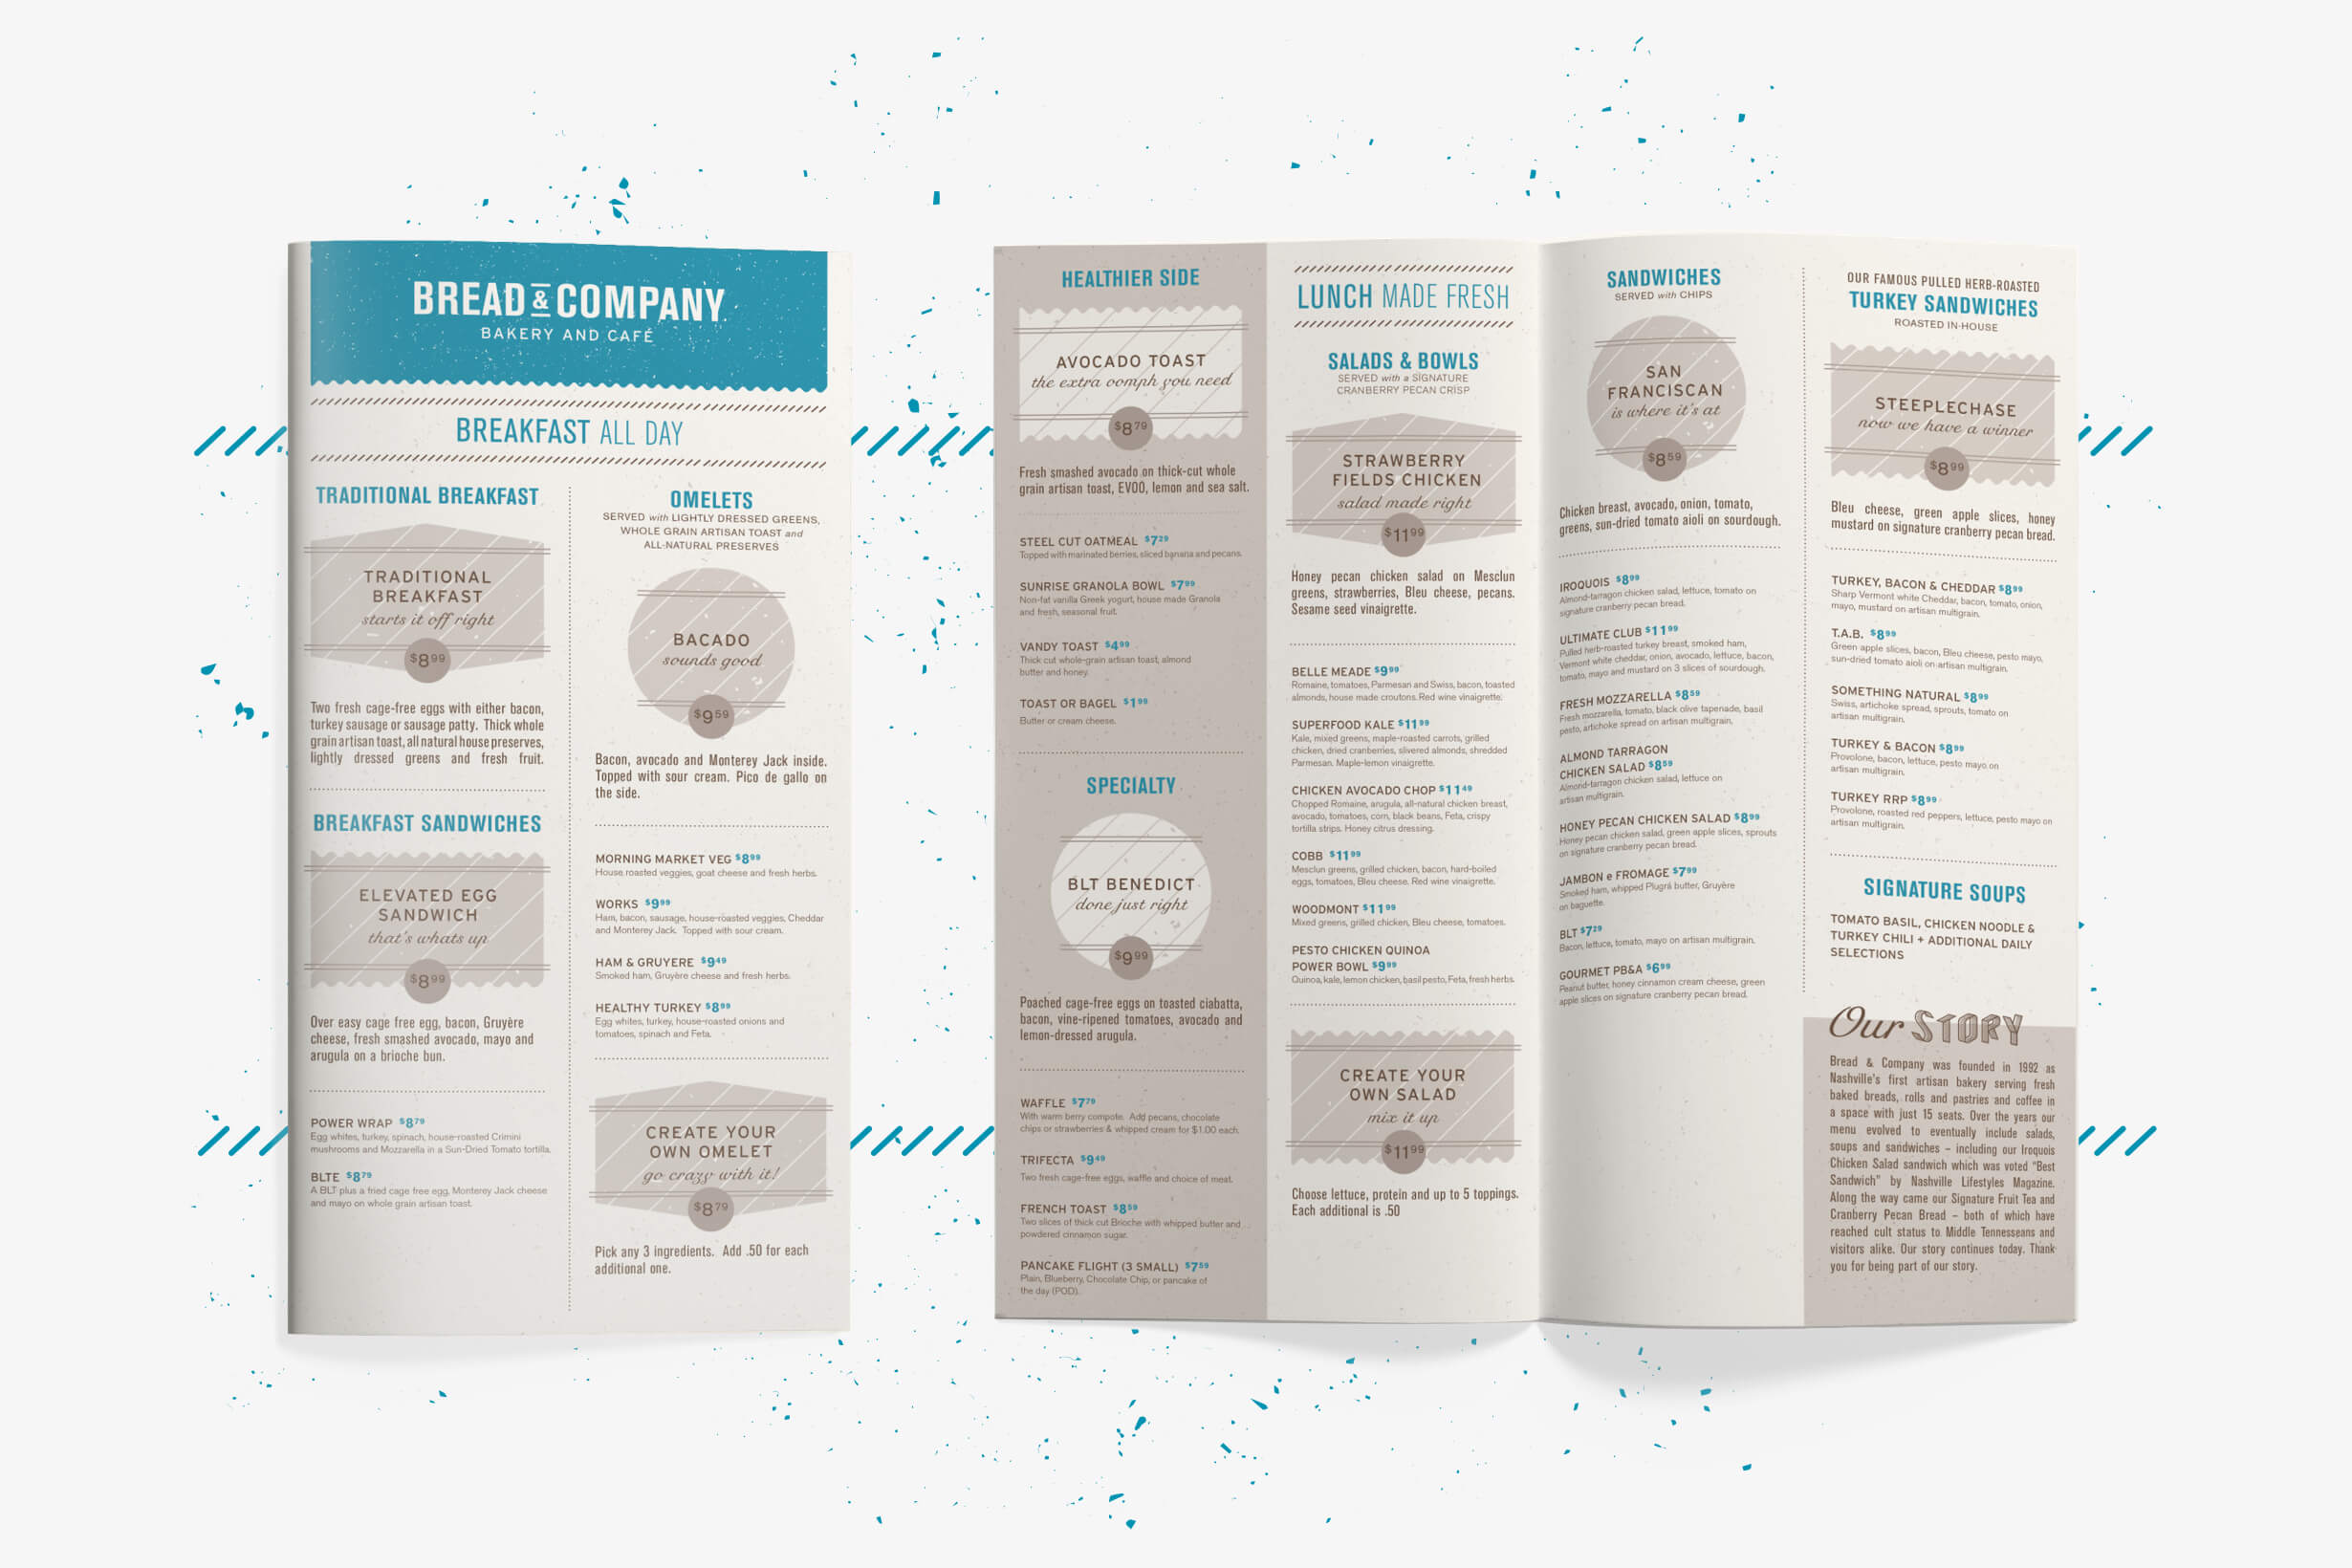 Bread & Company printed menu layout and design for restaurant location in the West End neighborhood, Nashville, Tennessee